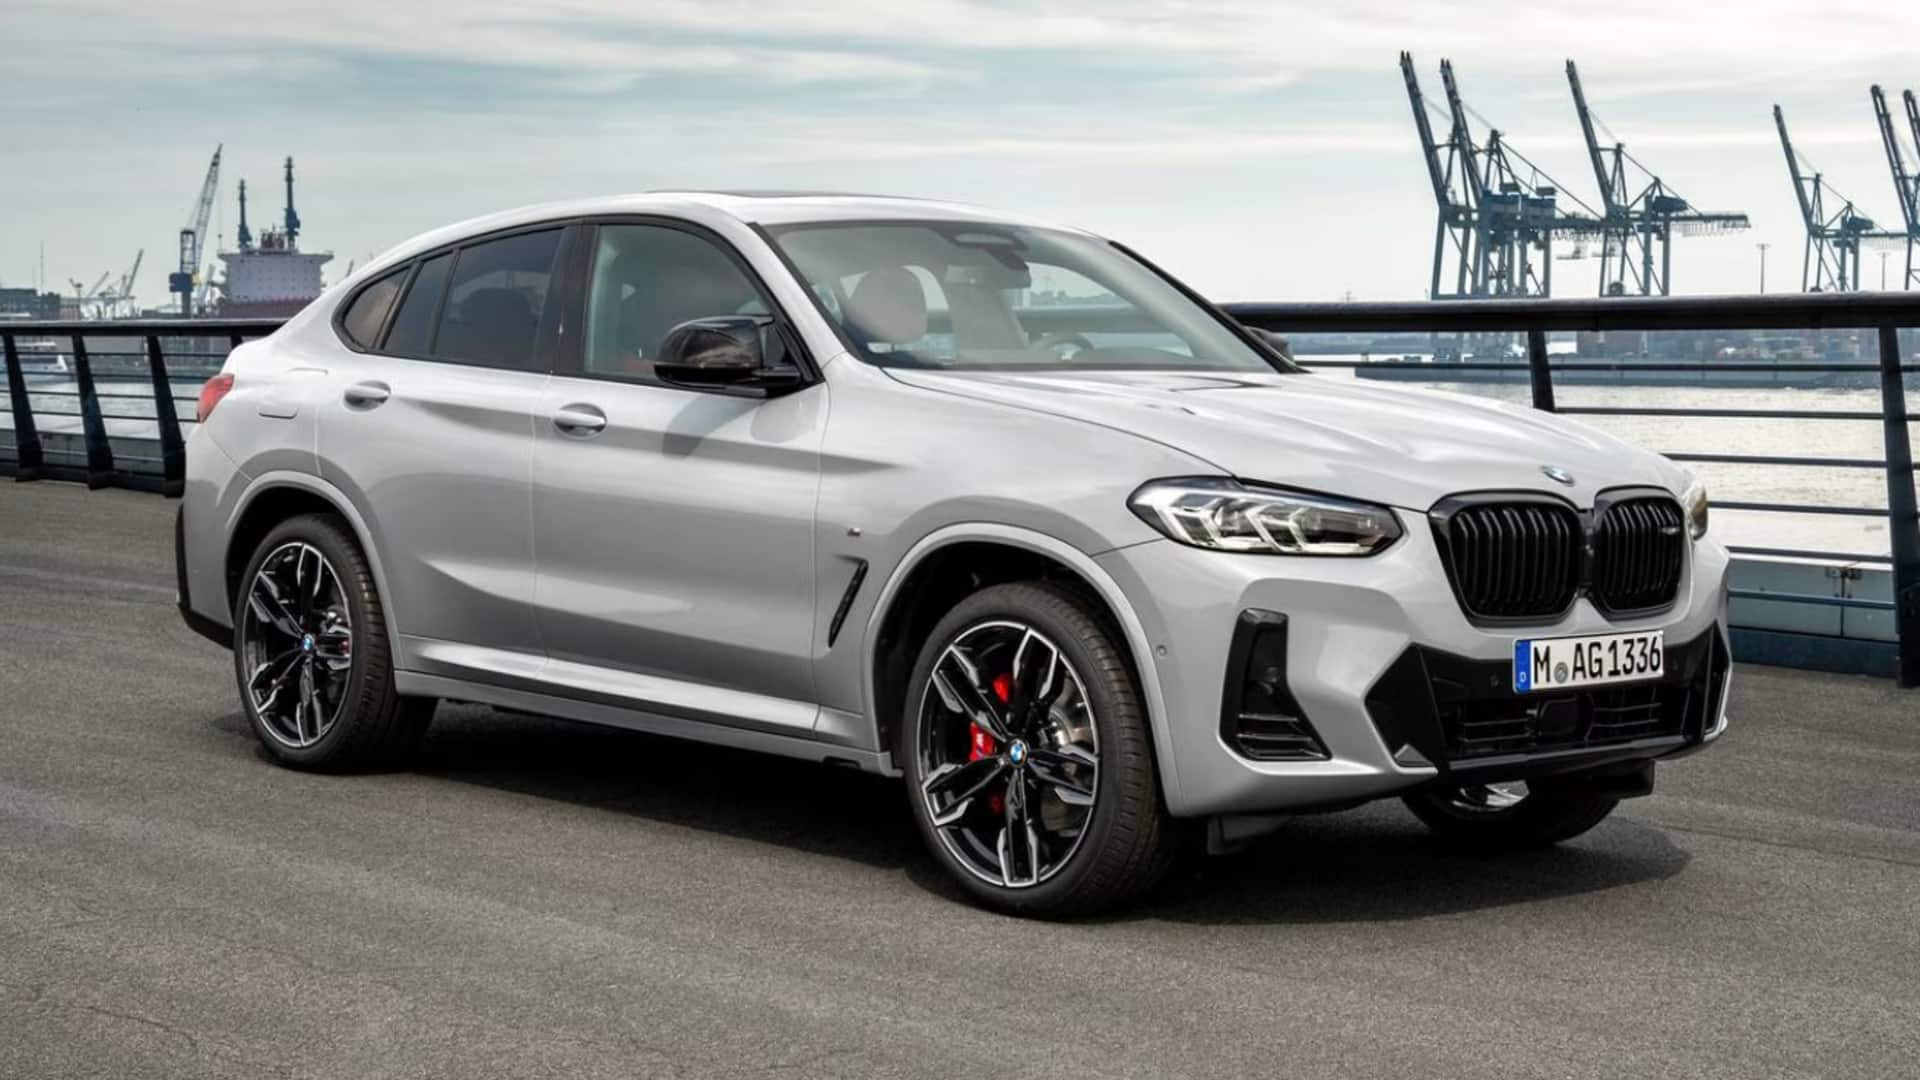 Is BMW X4 M40i more sporty compared to Audi Q8